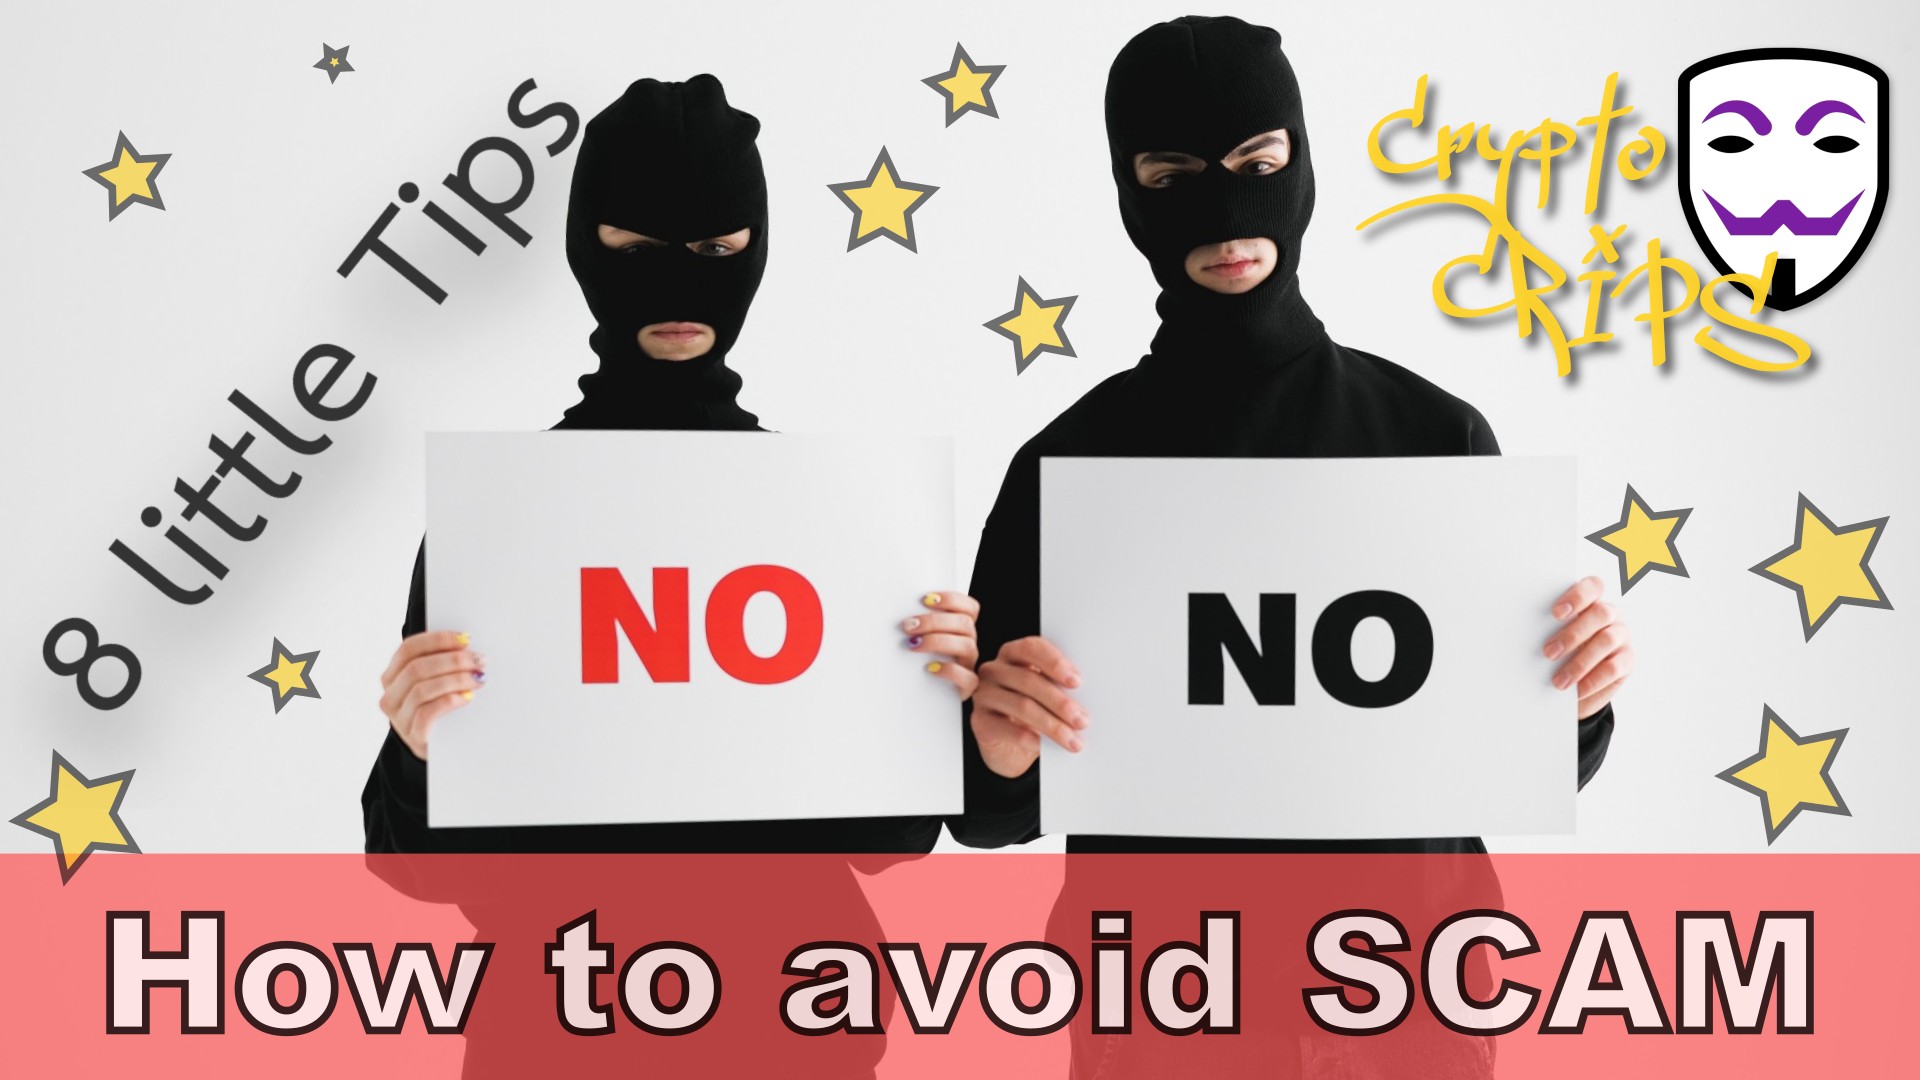 8 little Tips on how to avoid scam